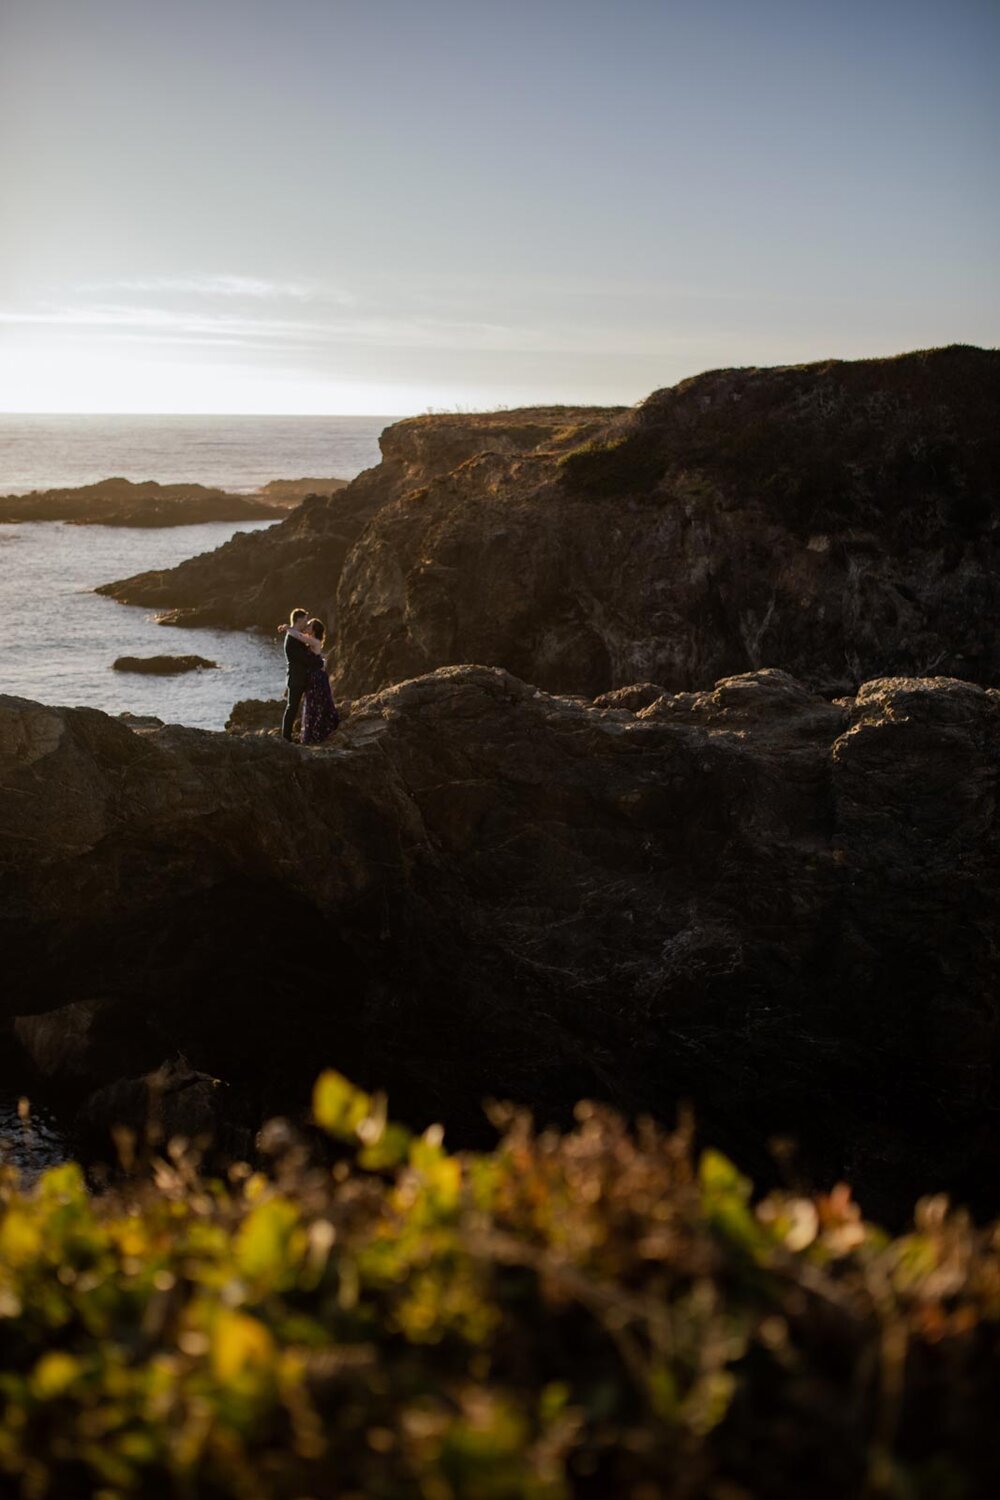 Newlywed couple embracing on rocky cliffs beside the ocean in Mendocino CA Carly Romeo and Co